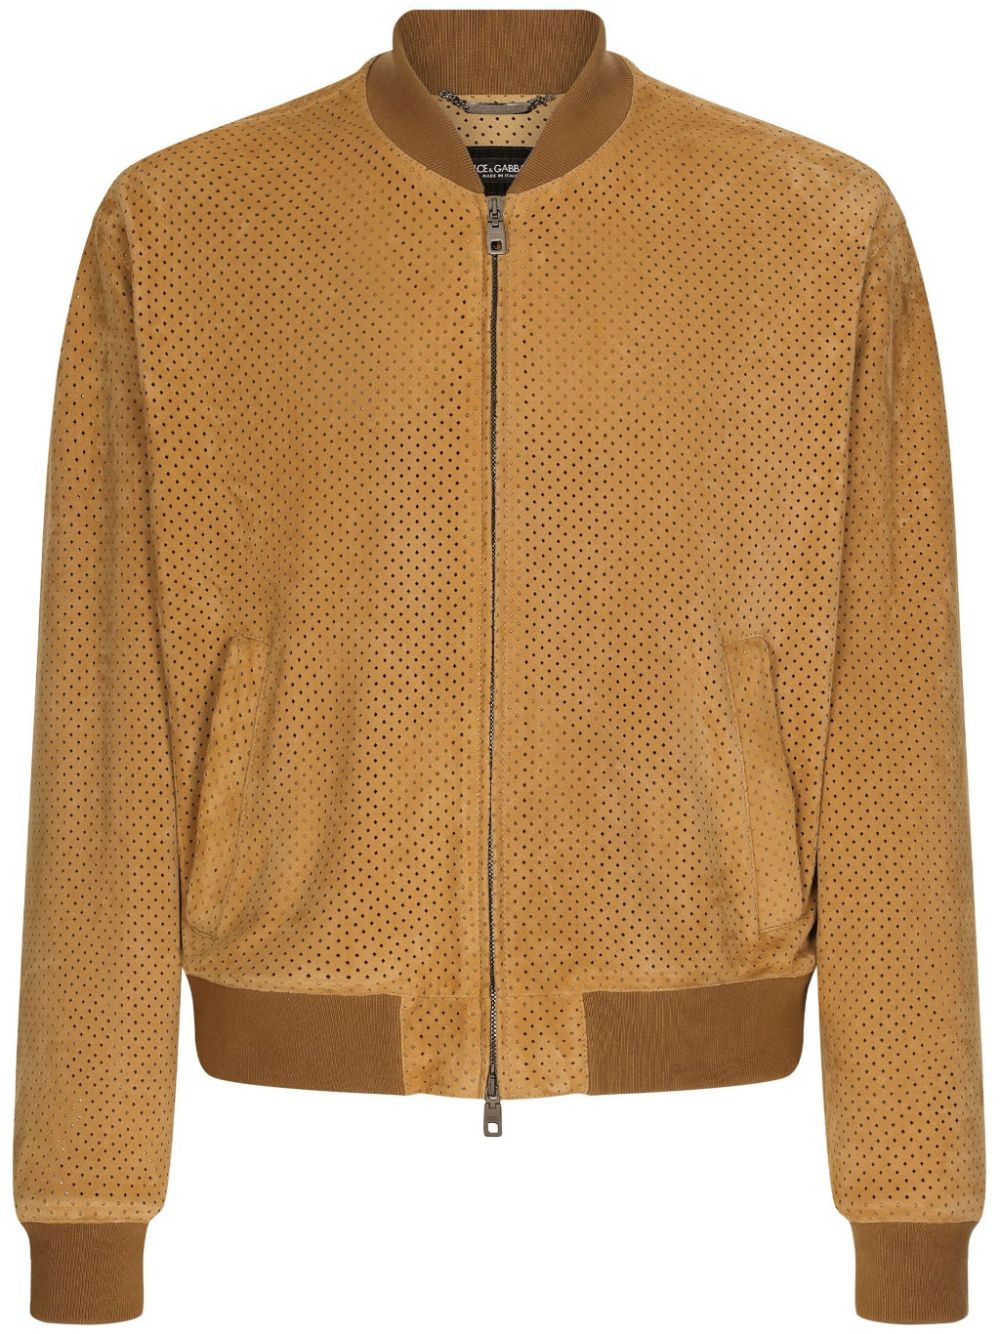 Dolce & Gabbana Perforated Suede Bomber Jacket In Orange